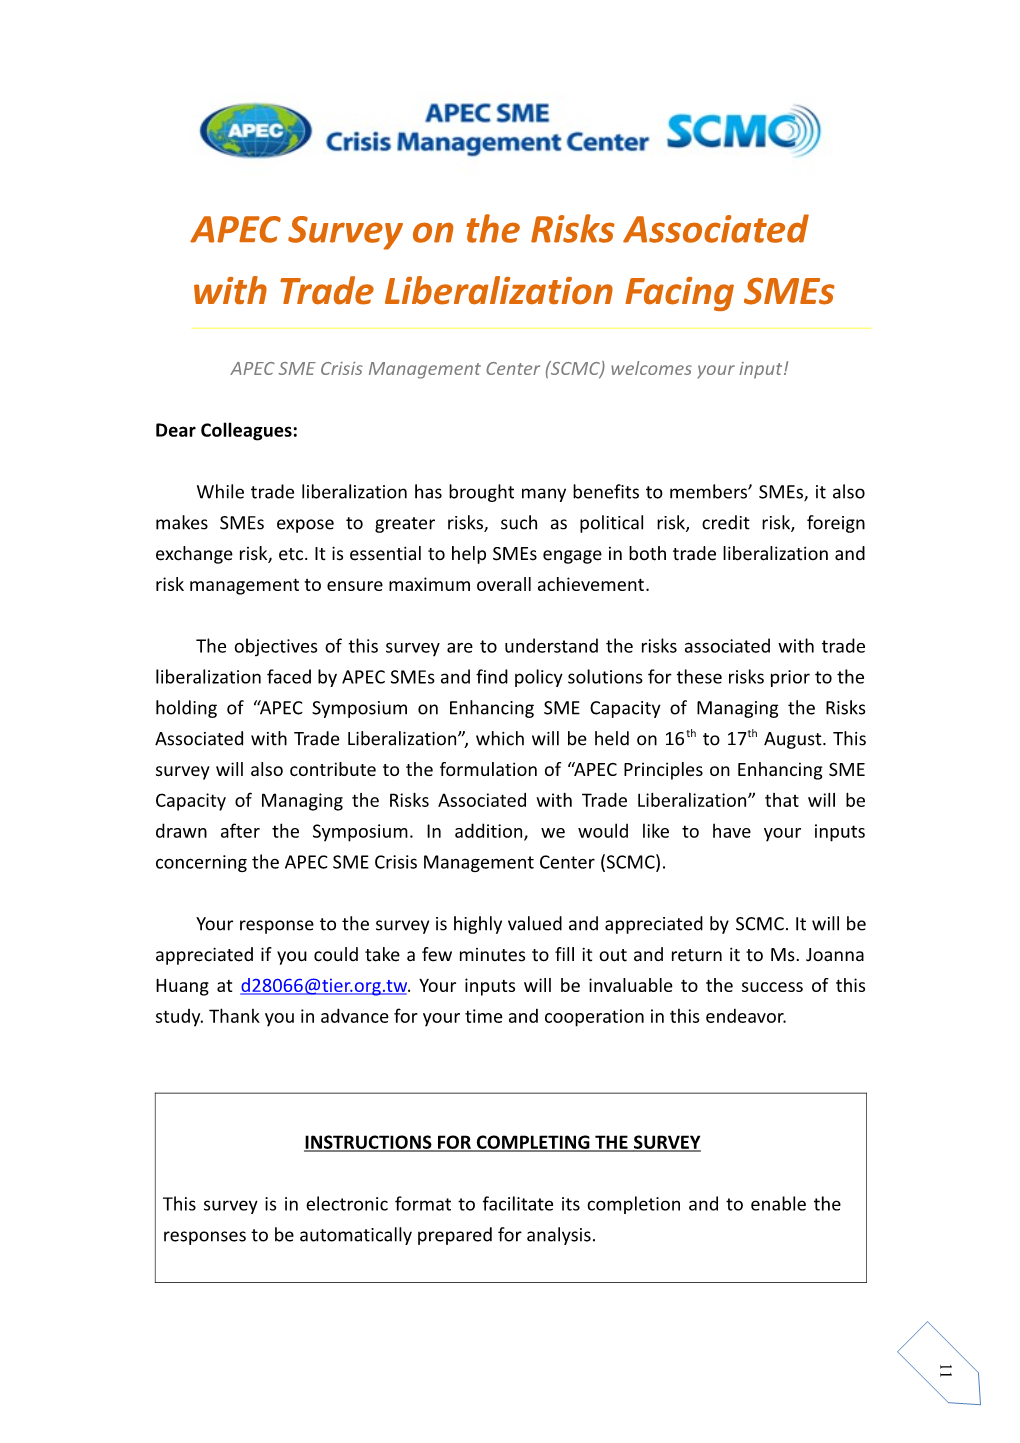 APEC Survey on the Risks Associated with Trade Liberalization Facing Smes